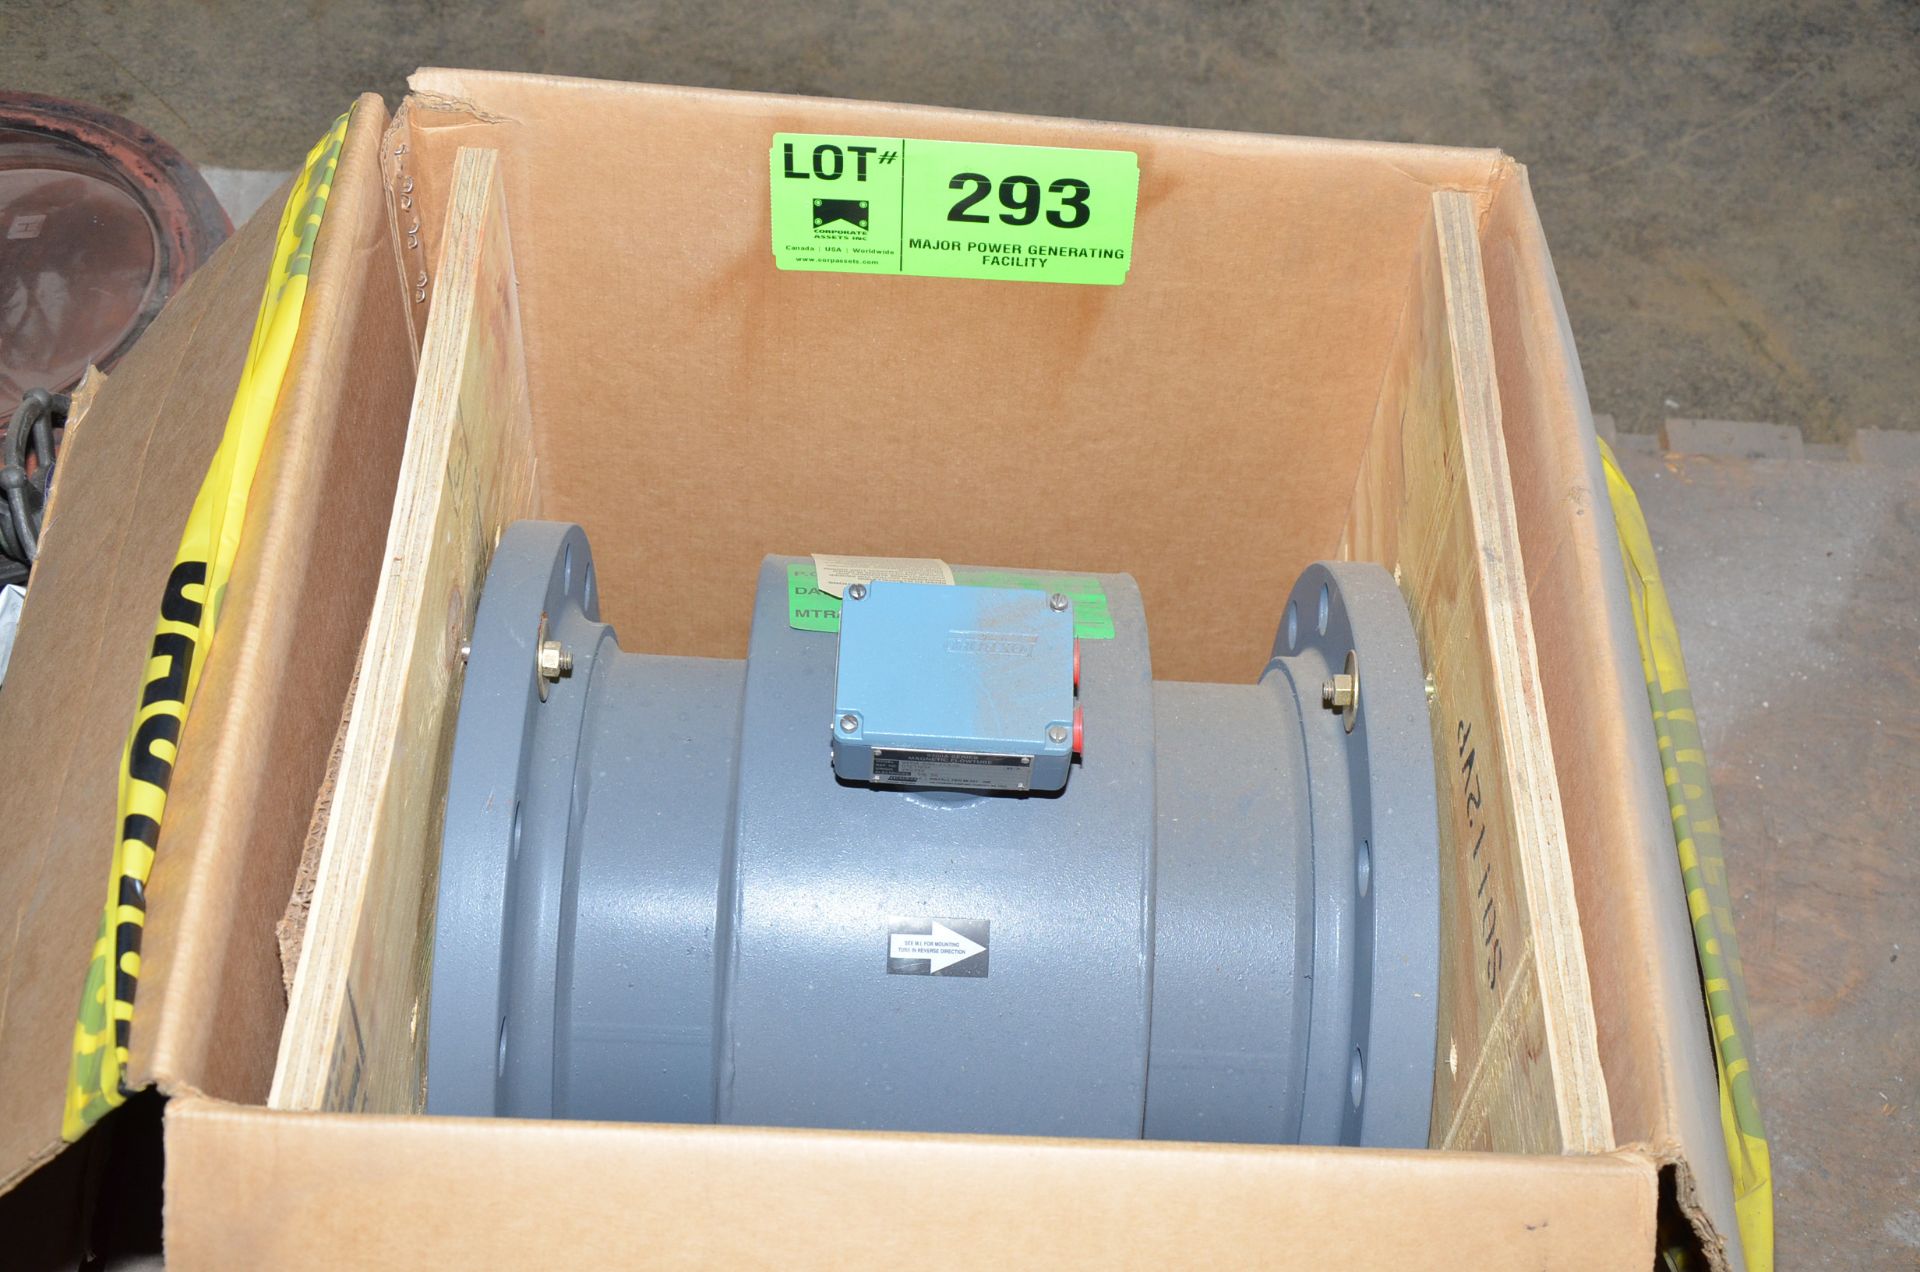 MAGNETIC FLOW METER [RIGGING FEE FOR LOT #293 - $25 USD PLUS APPLICABLE TAXES]